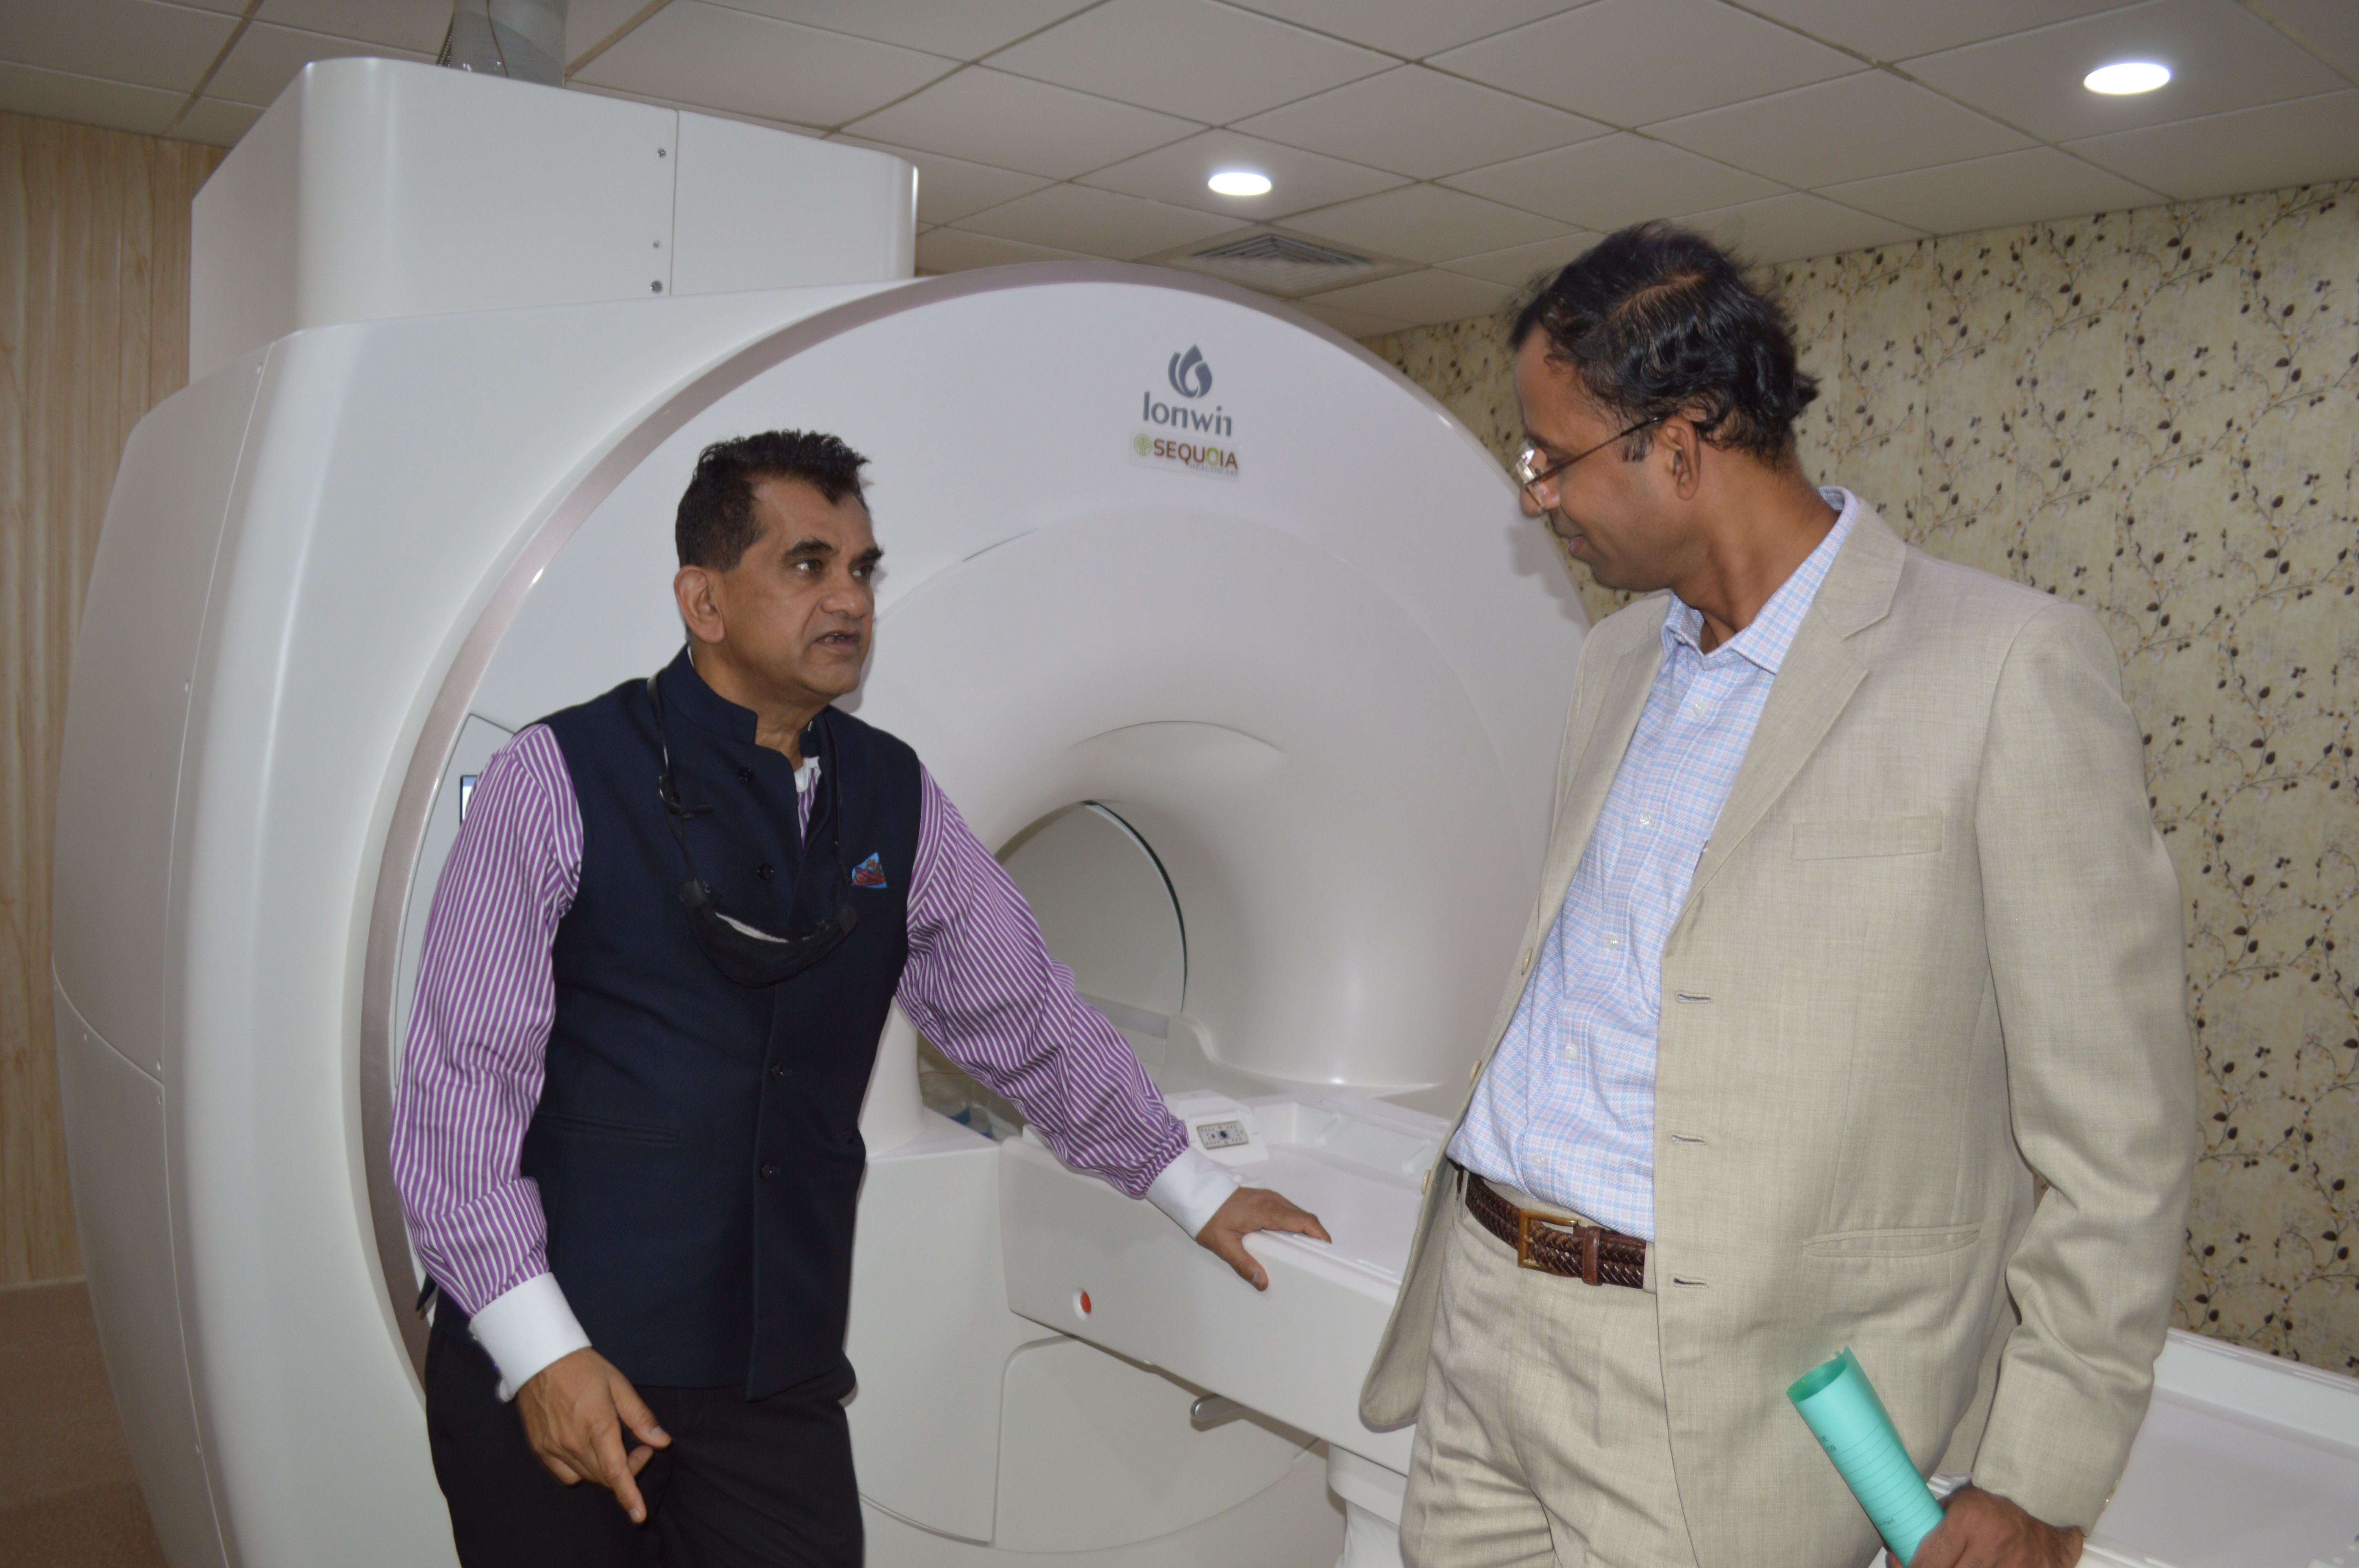 Dr. Jitendra Sharma discussed AMTZ Medical Care and Health Care Technology in India with Mr. Amitabh Kant, Former CEO of Niti Aayog